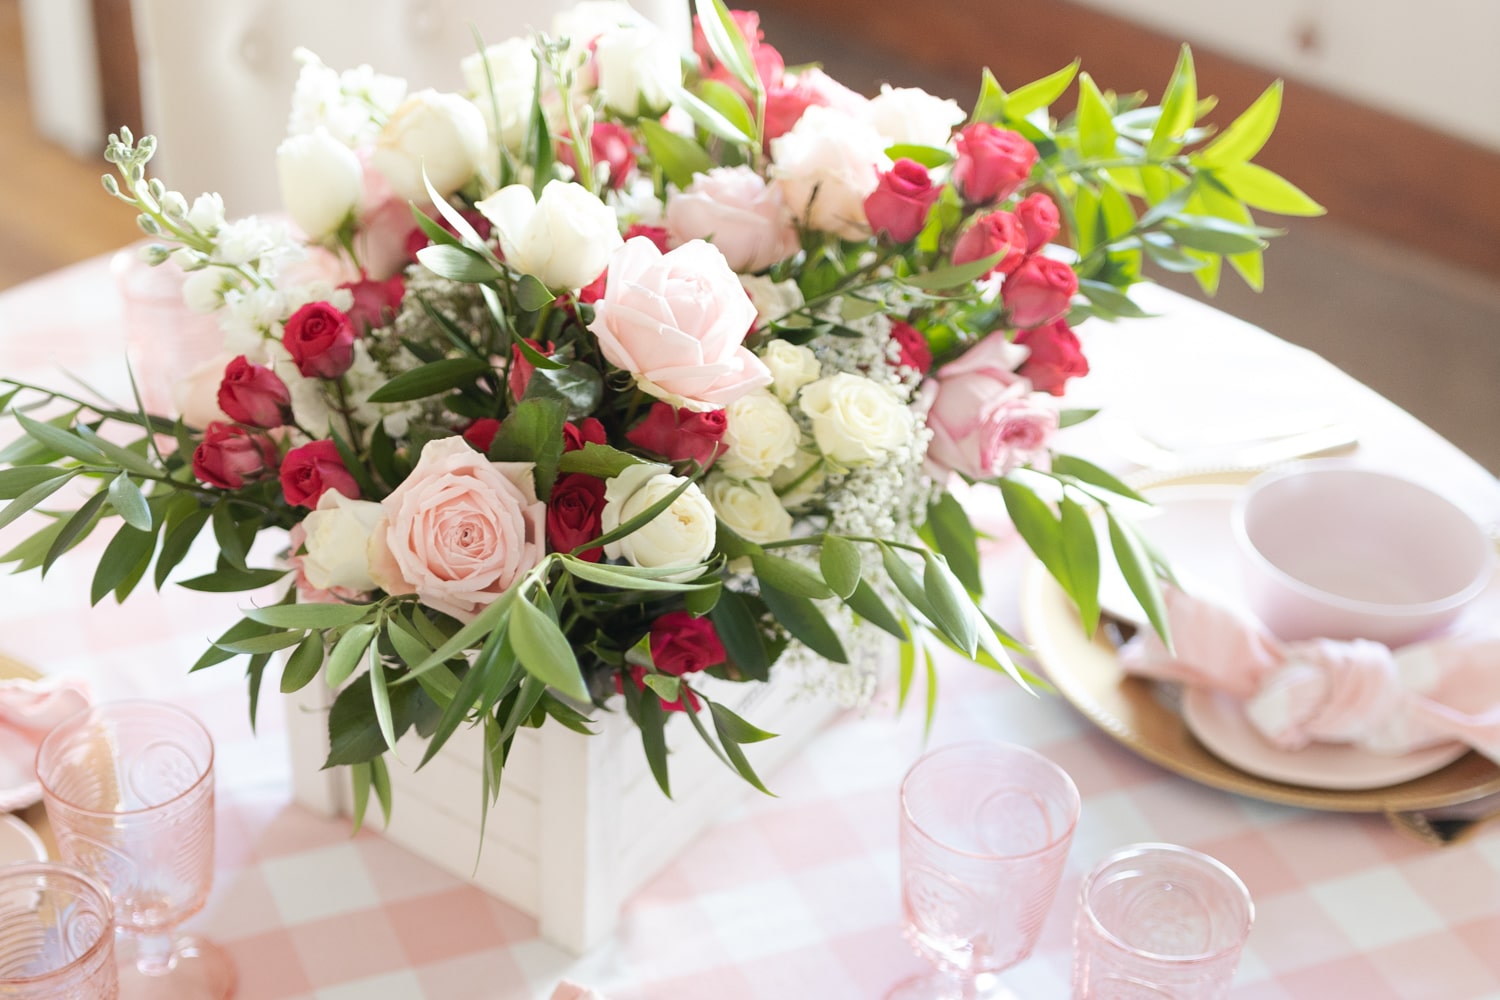 Valentine's table centerpiece designed by blogger Stephanie Ziajka on Diary of a Debutante